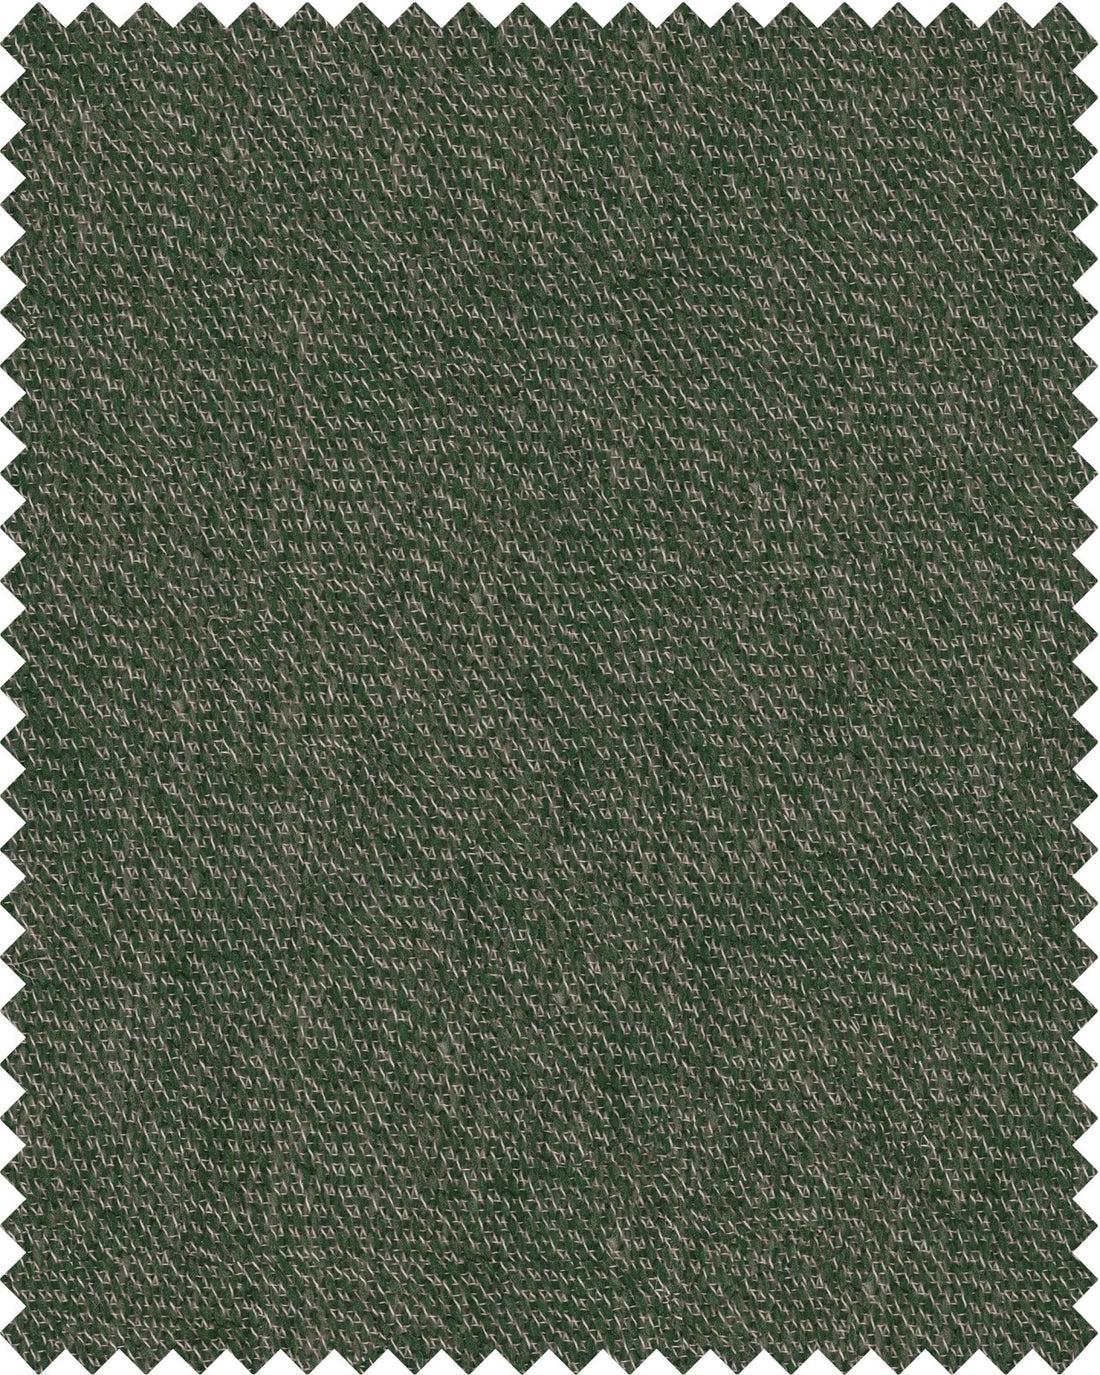 Grüner Baum fabric in forest green color - pattern number FB00103 - by Mind The Gap in the Tyrol Apres-ski Home Collection collection